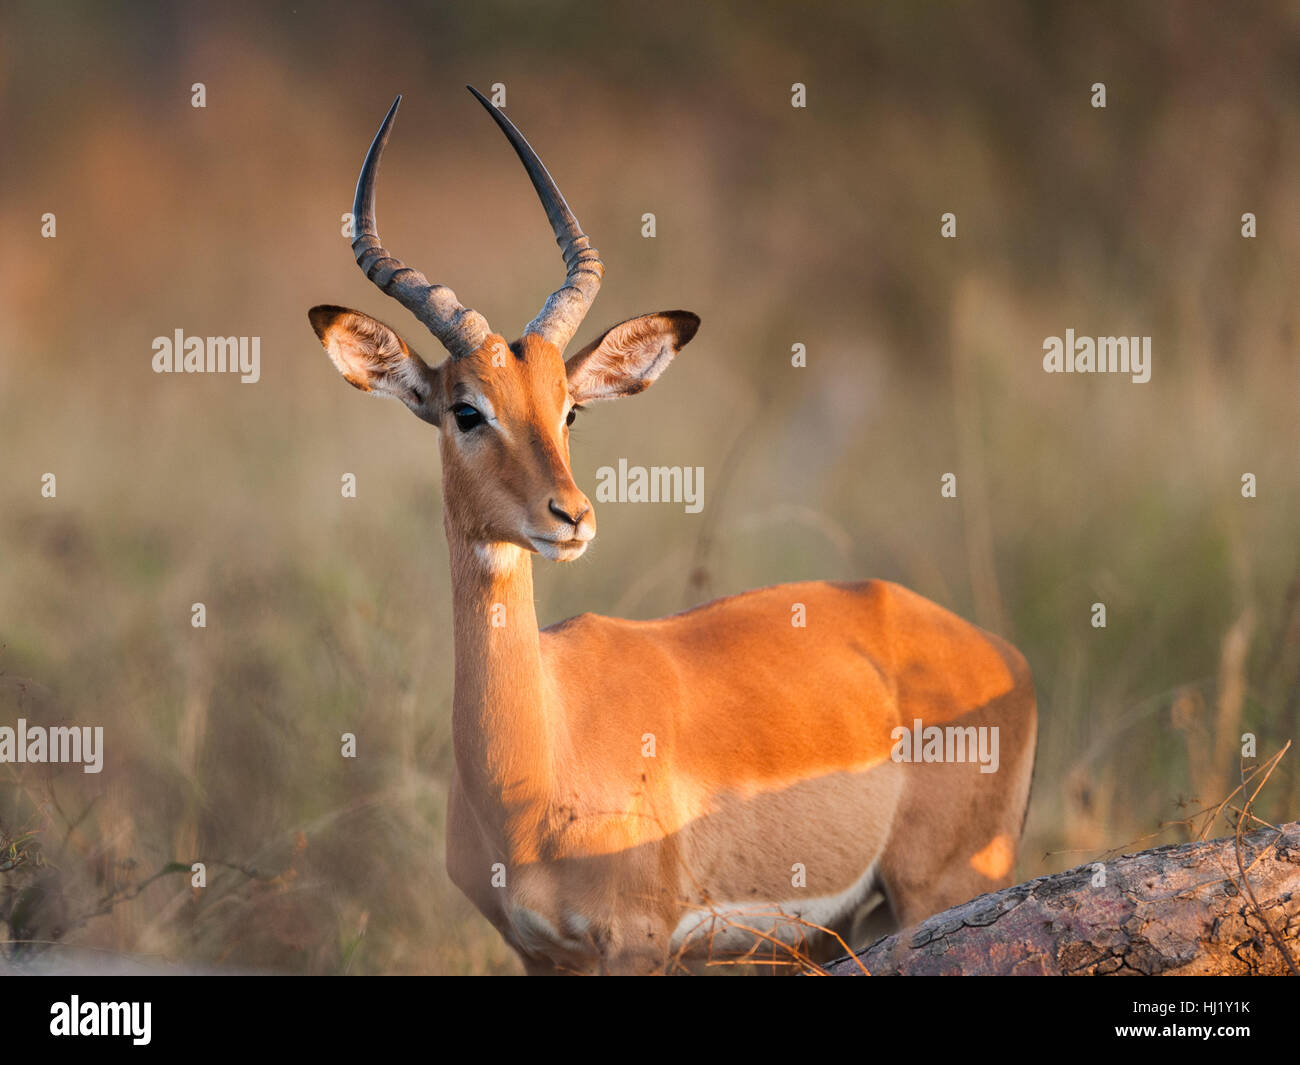 single, park, animal, wild, africa, male, masculine, face, horn, watchful, Stock Photo